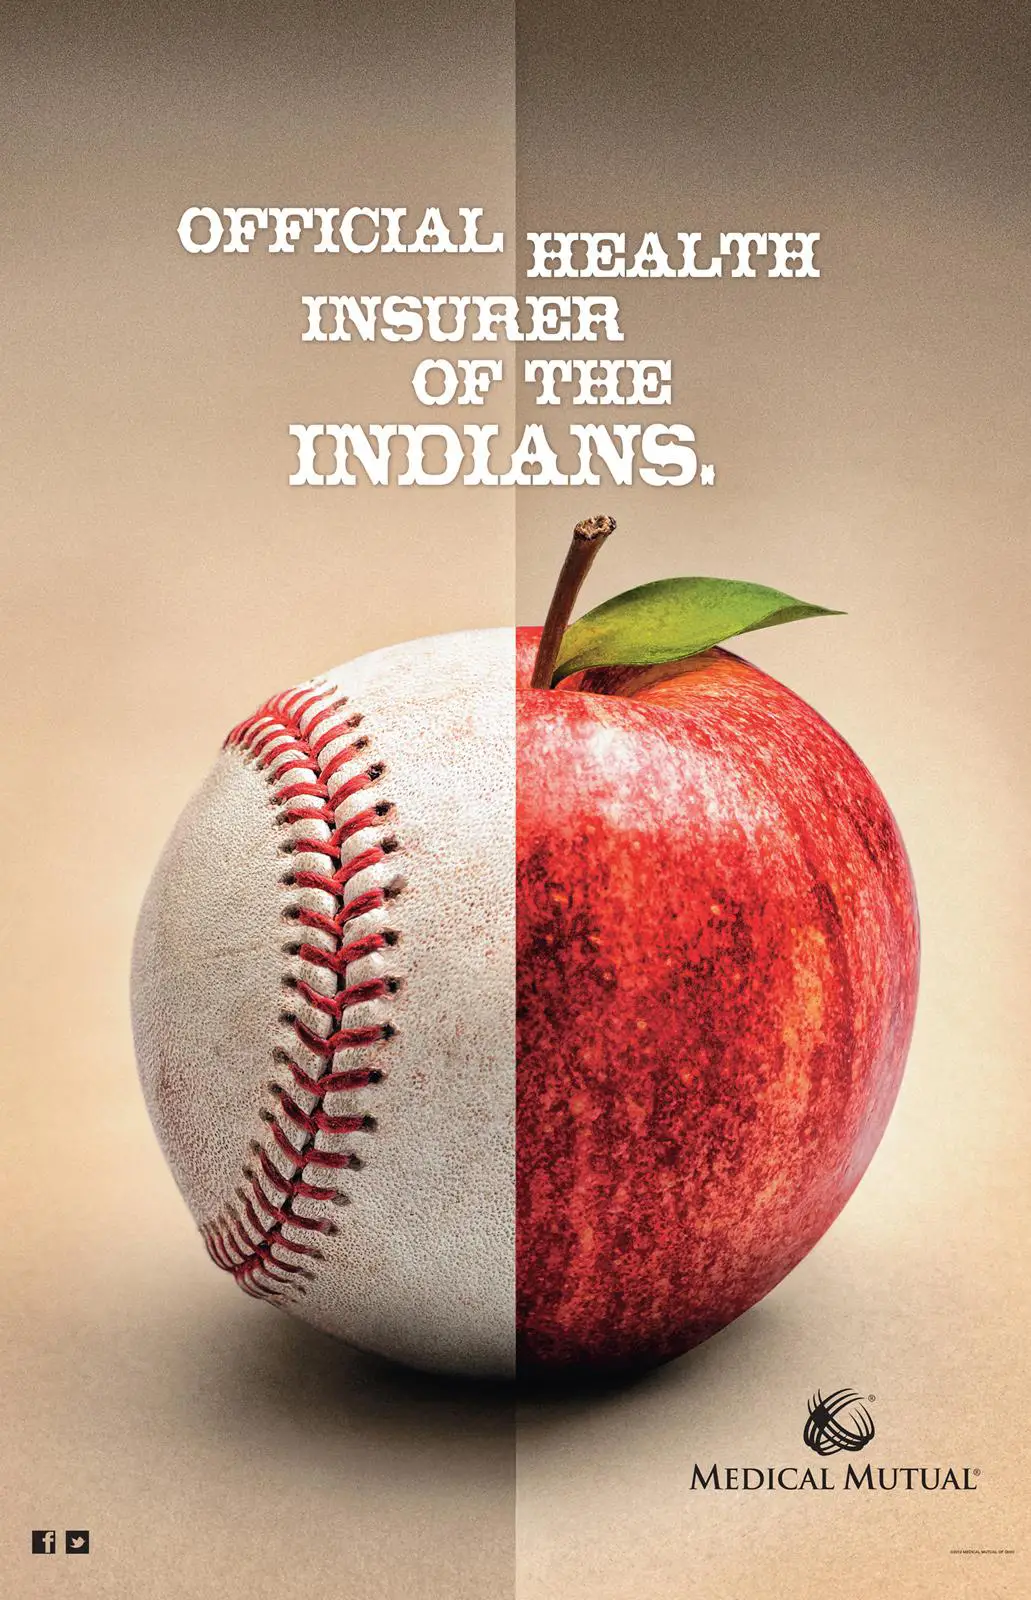 official health insurer of the indians